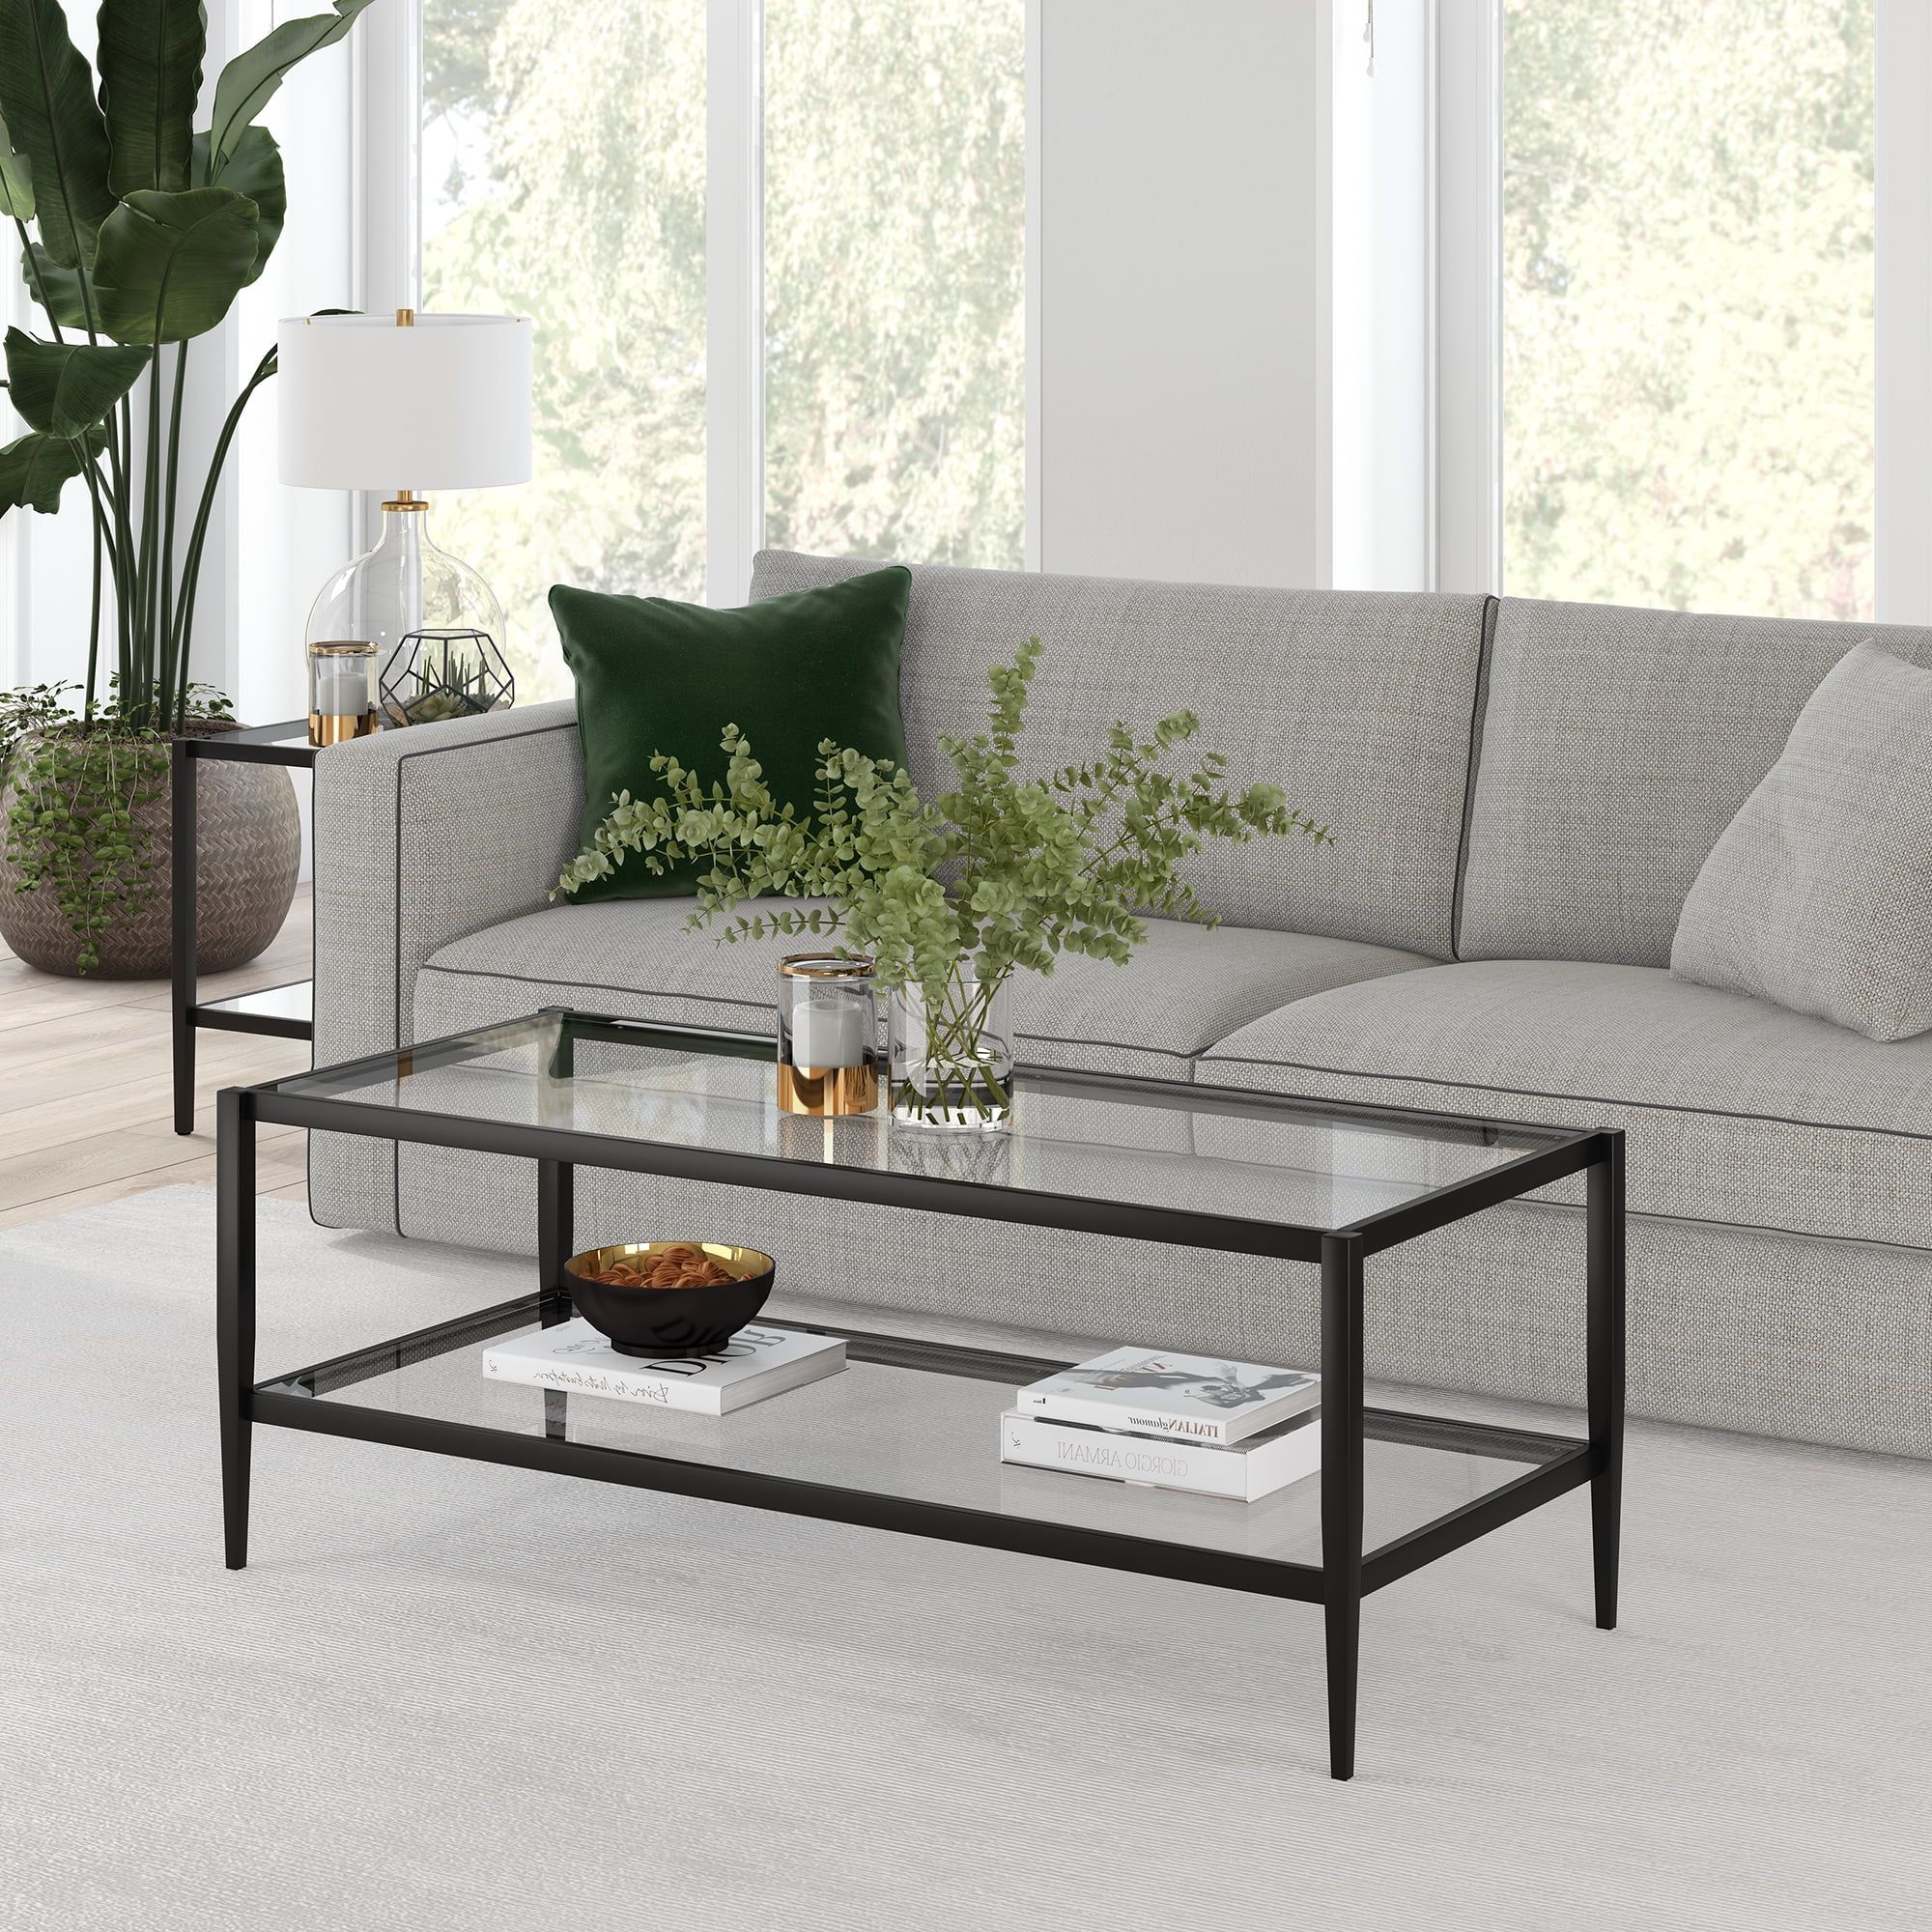 Modern Glass Coffee Table, Rectangular Cocktail Table In Blackened Throughout Rectangular Coffee Tables With Pedestal Bases (View 9 of 20)